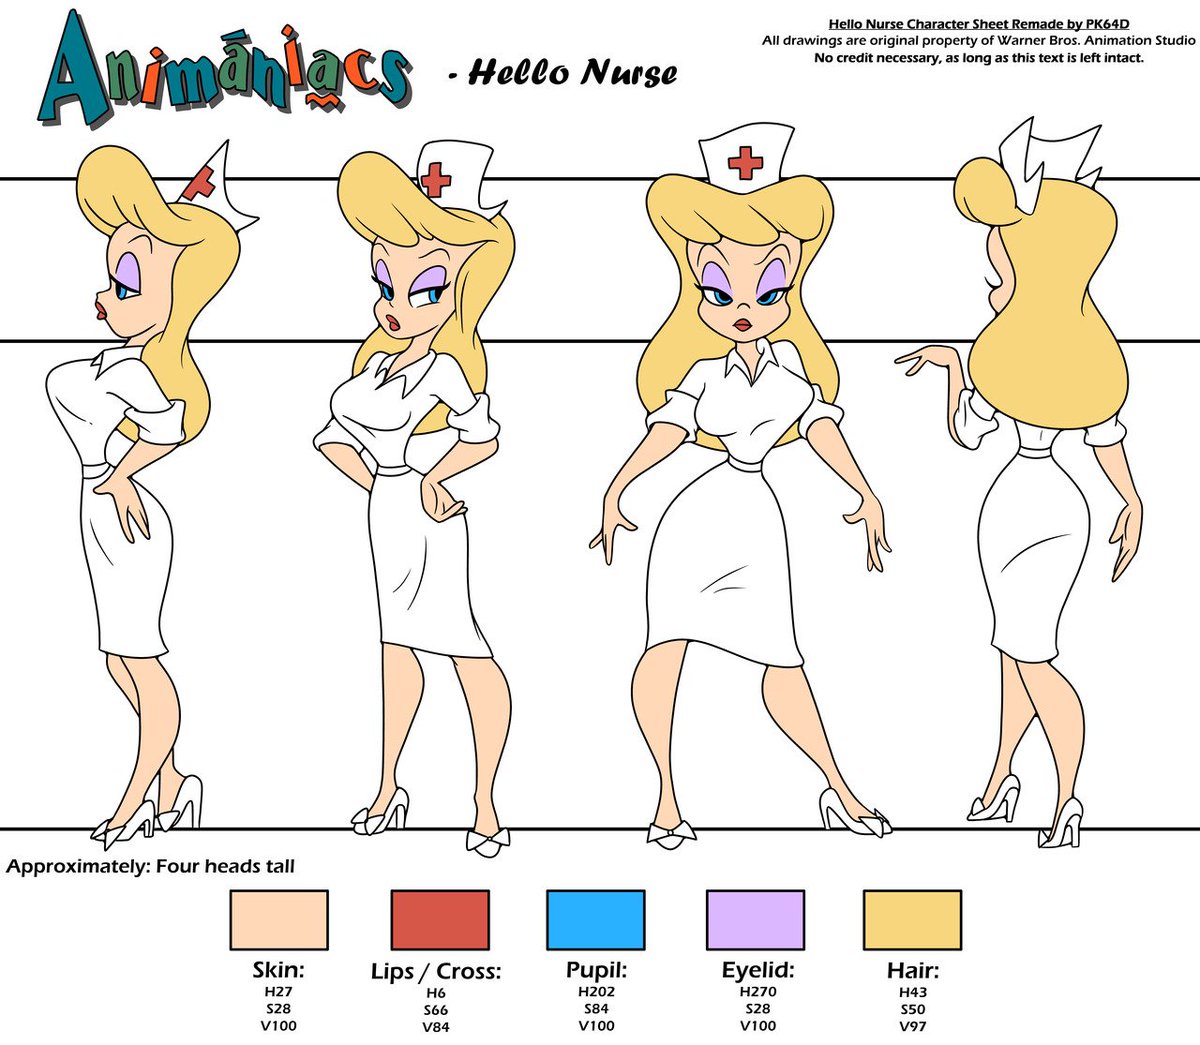 Model sheet and cels of Hello Nurse from Animaniacs.Album. pic.twitter.com/...